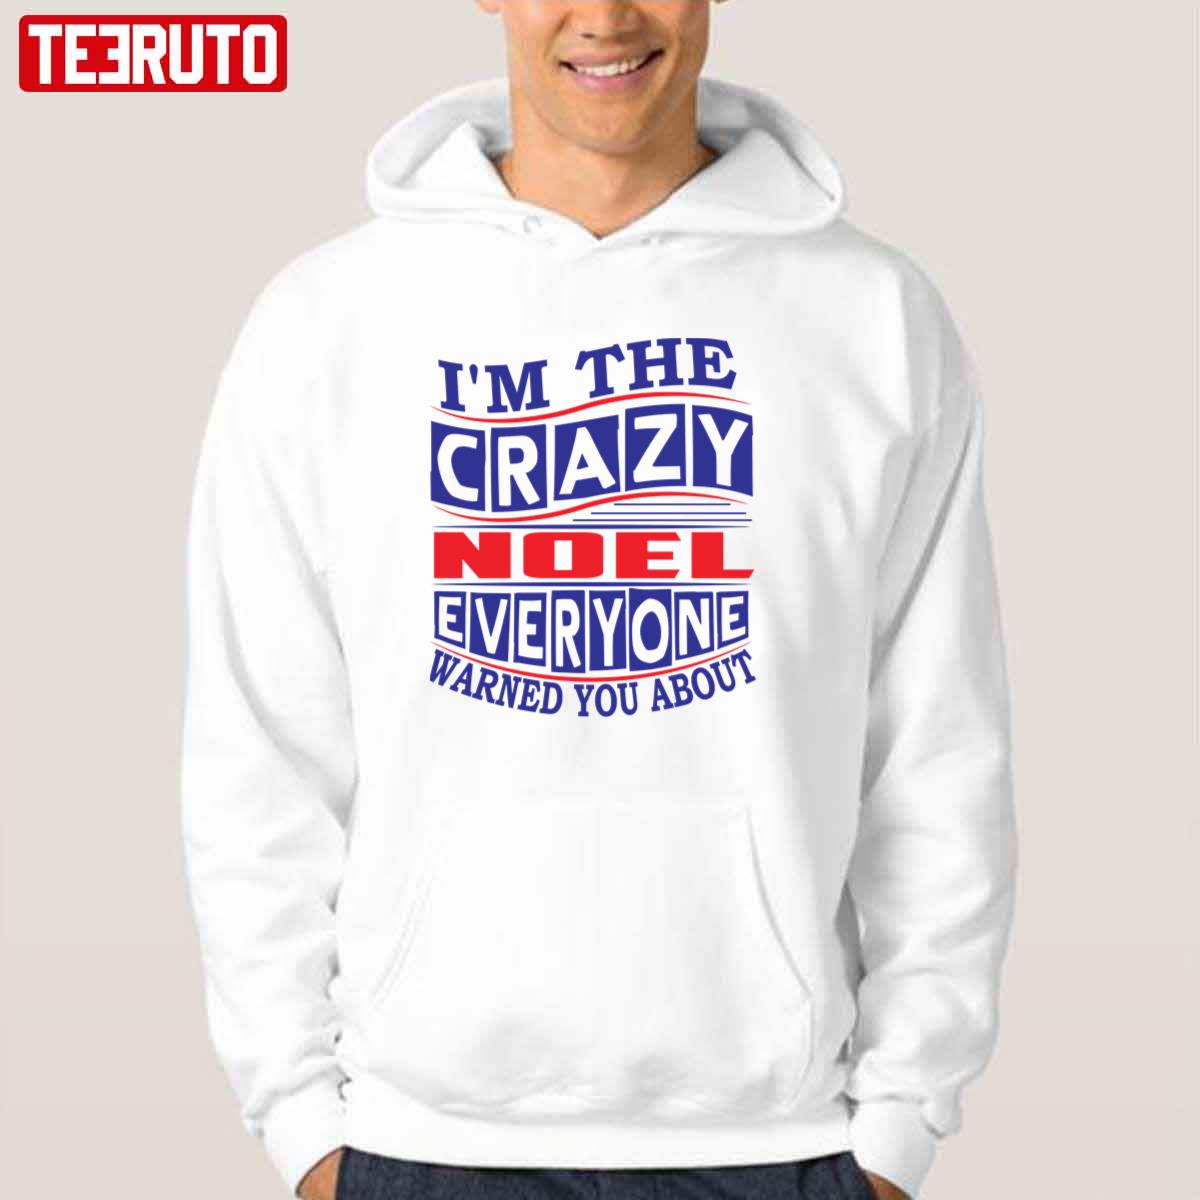 I'm The Crazy Noel Everyone Warned You About Unisex T-Shirt